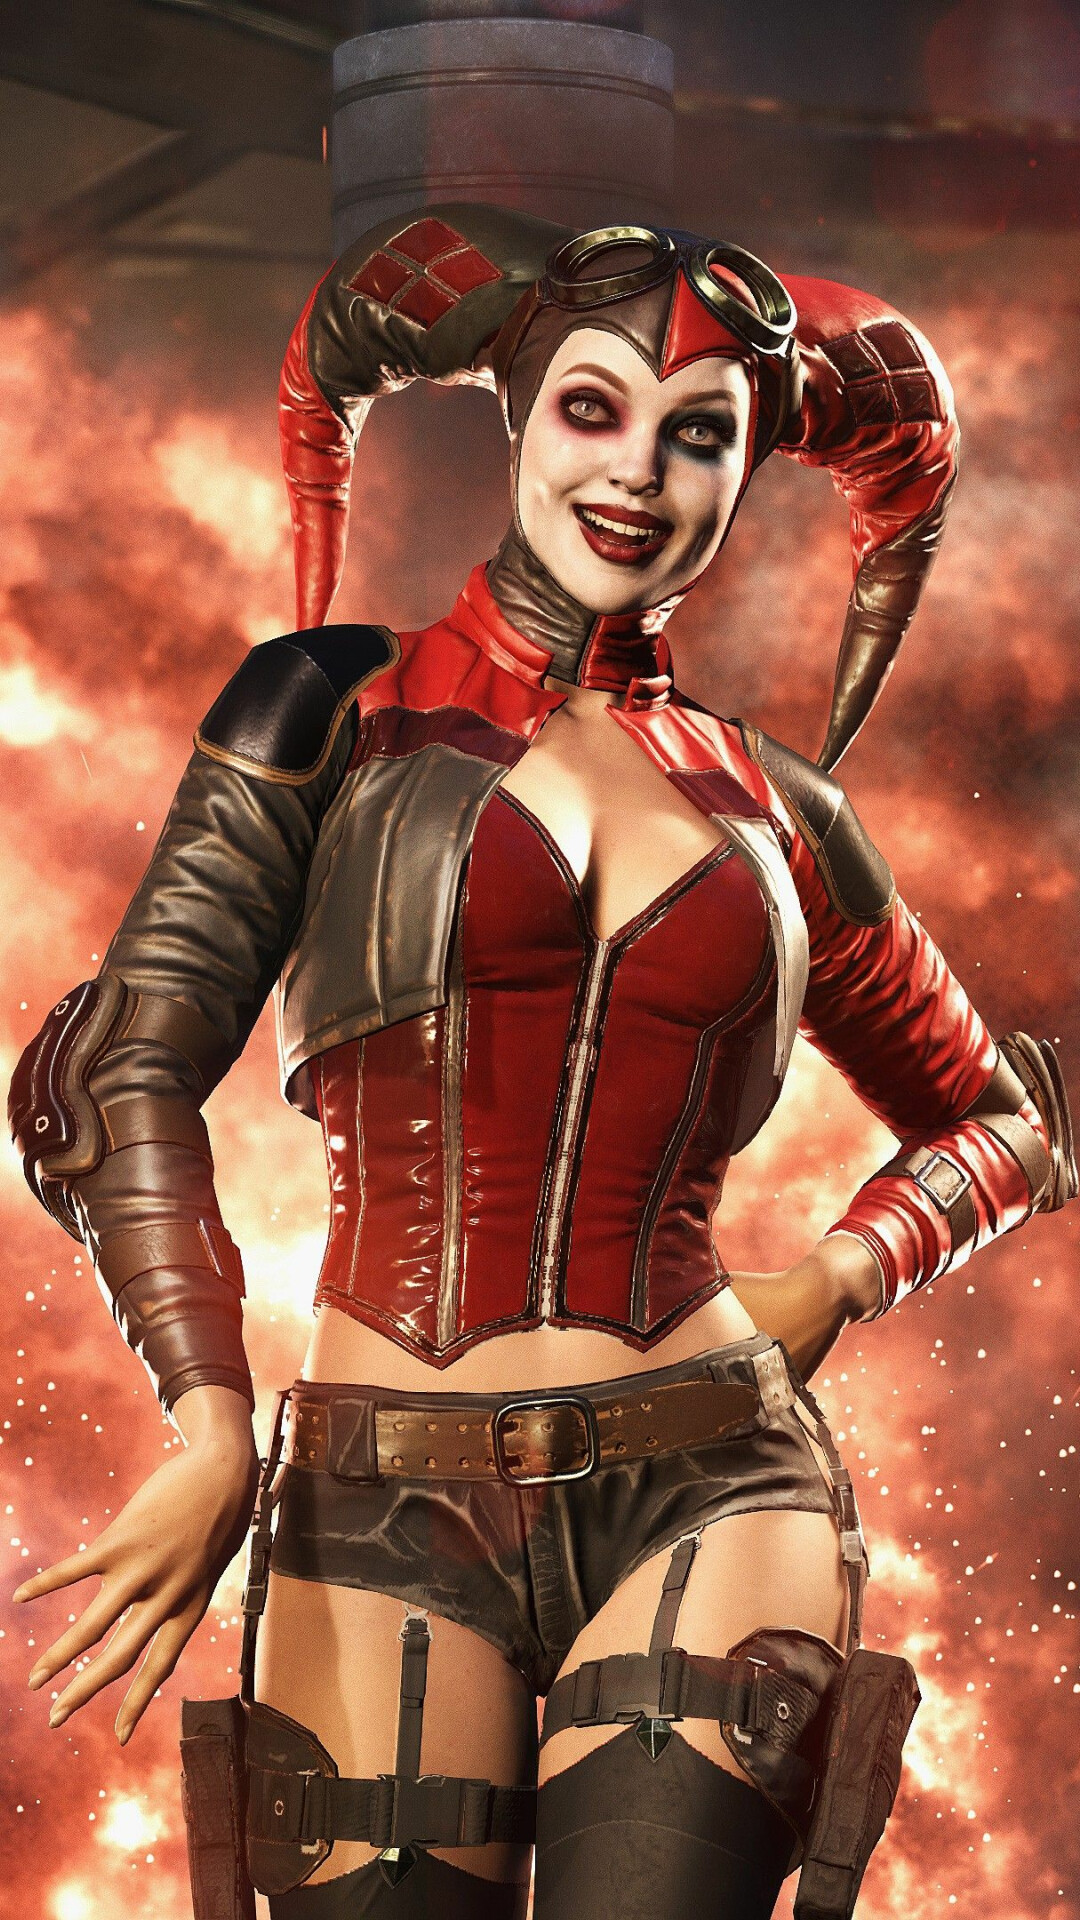 Injustice: Prime Reality Harley Quinn first appears alongside the Joker, helping prepare the nuke given to him by Lex Luthor with which he would destroy Metropolis. 1080x1920 Full HD Wallpaper.